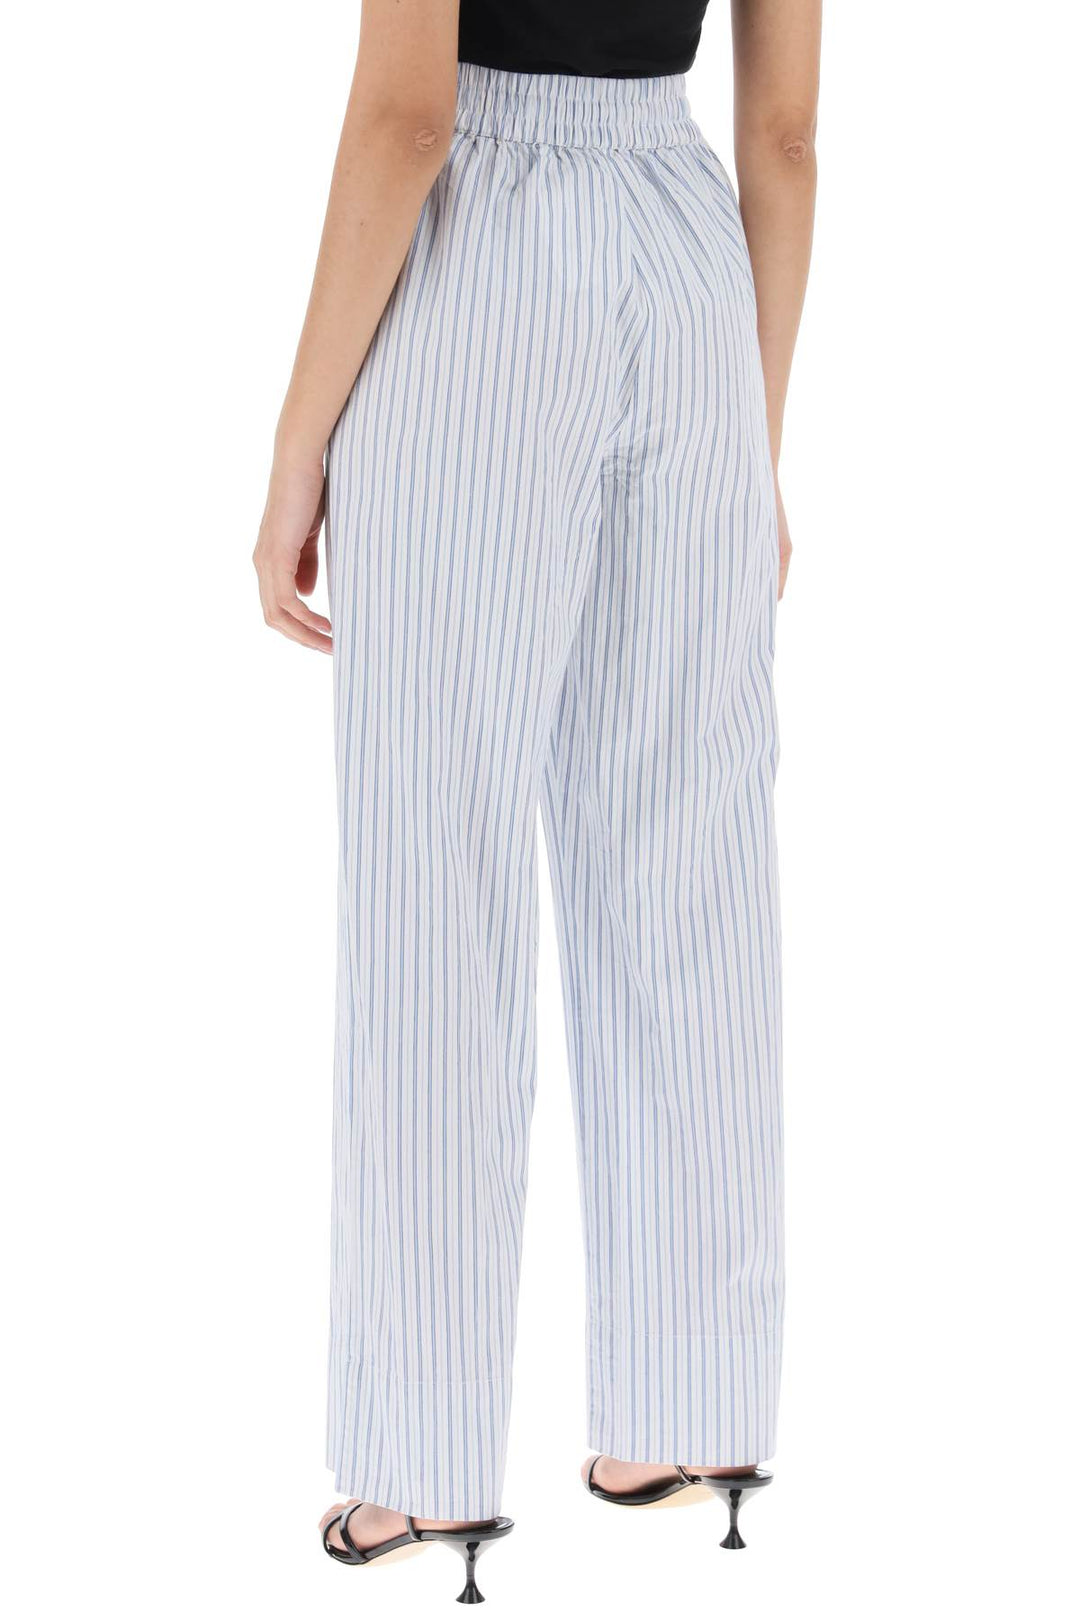 Skall Studio Striped Cotton Rue Pants With Nine Words   Bianco